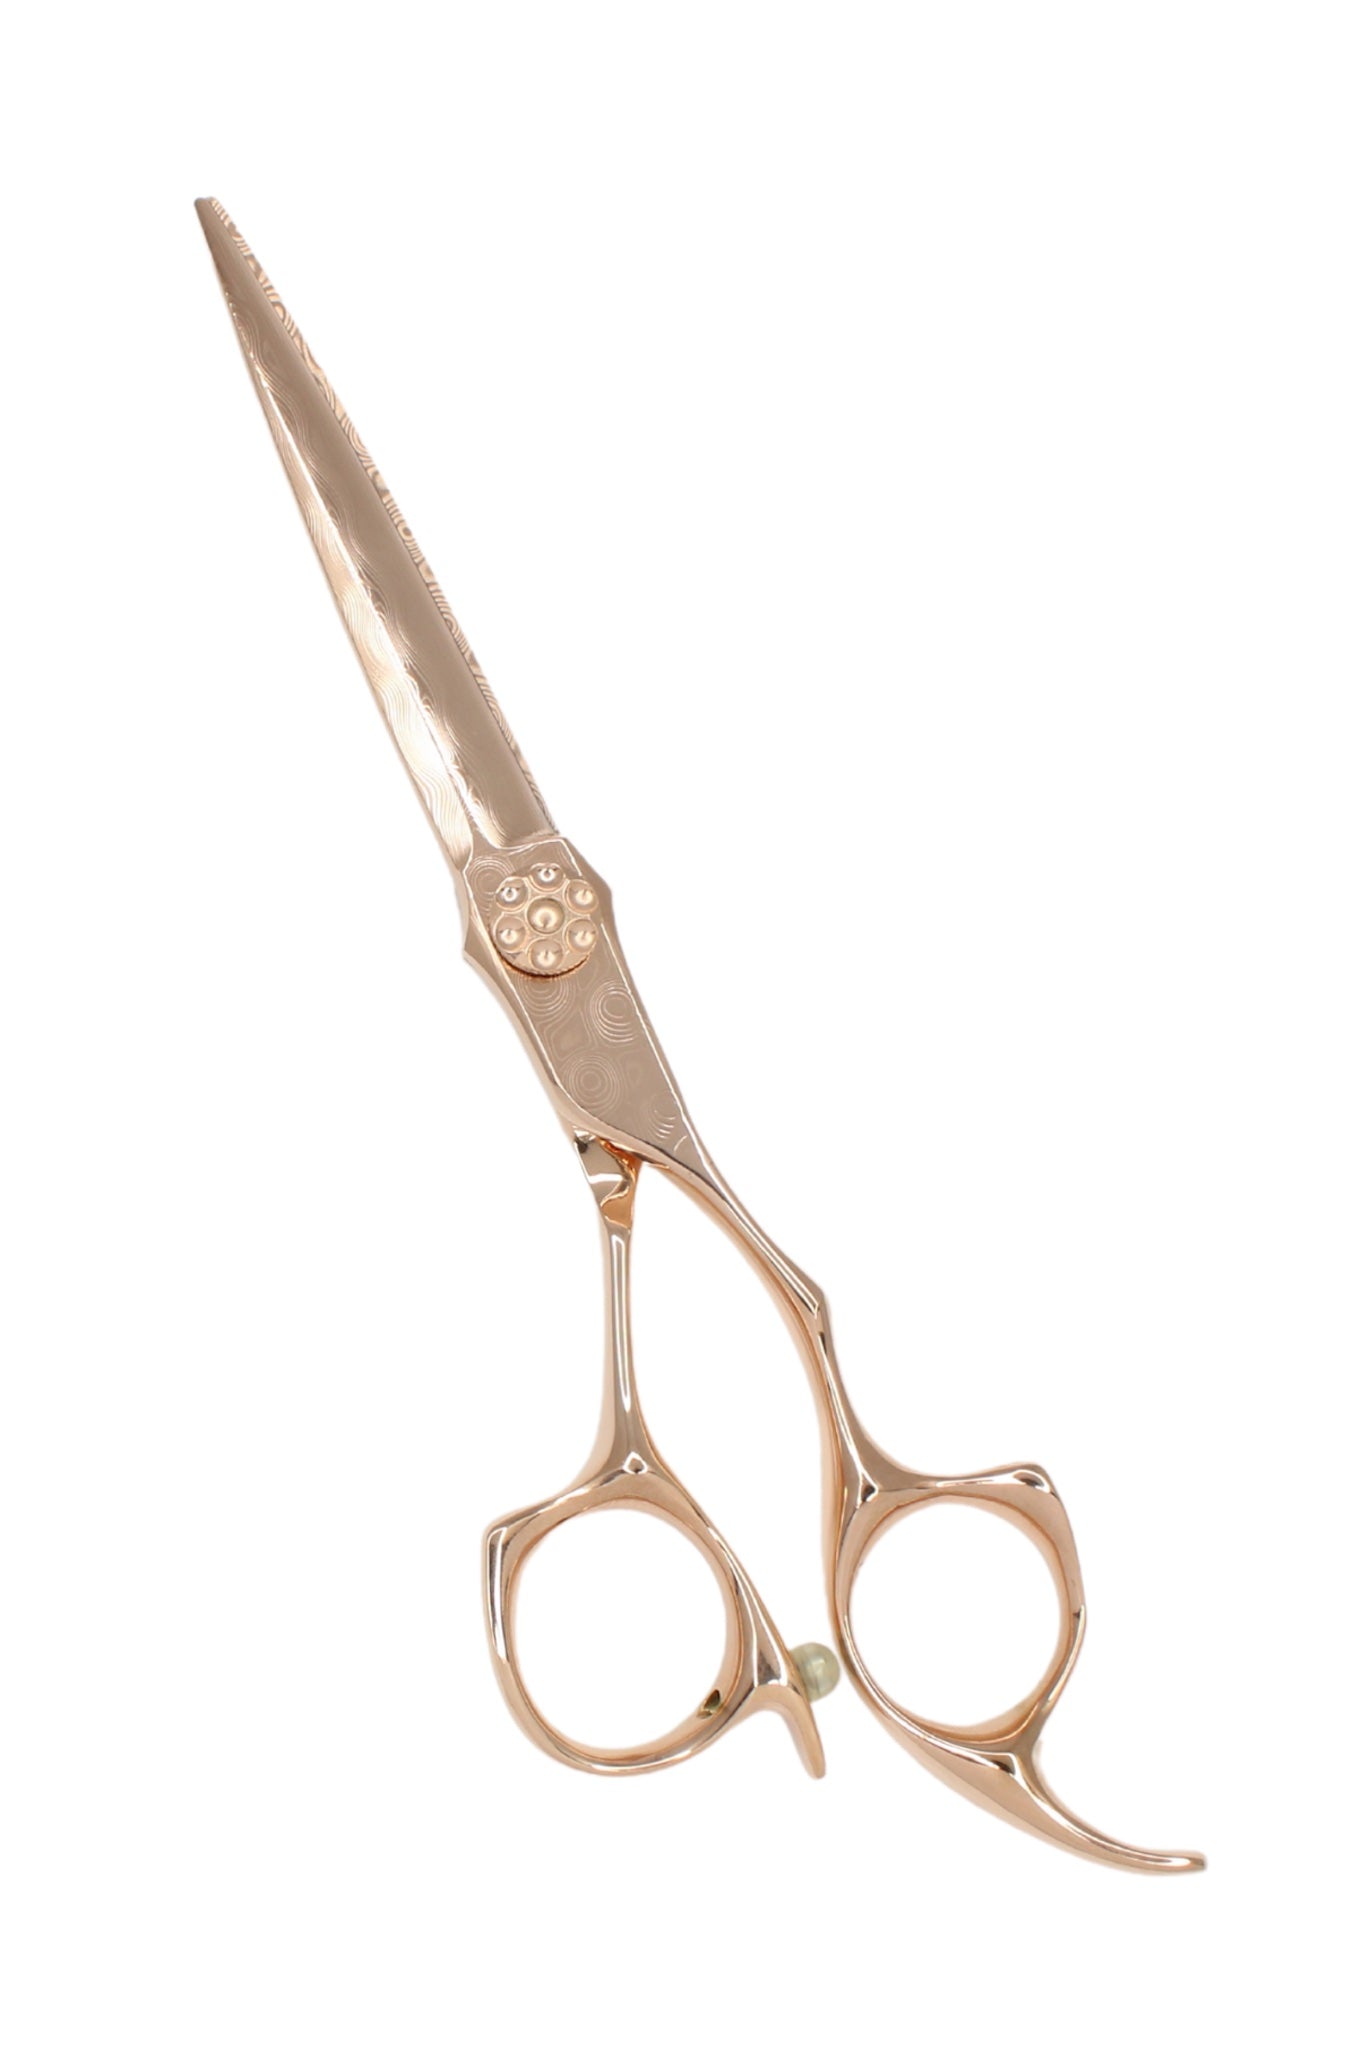 iCandy DAMASCUS ALL STAR Rose Gold Scissor 6.5" Pic1